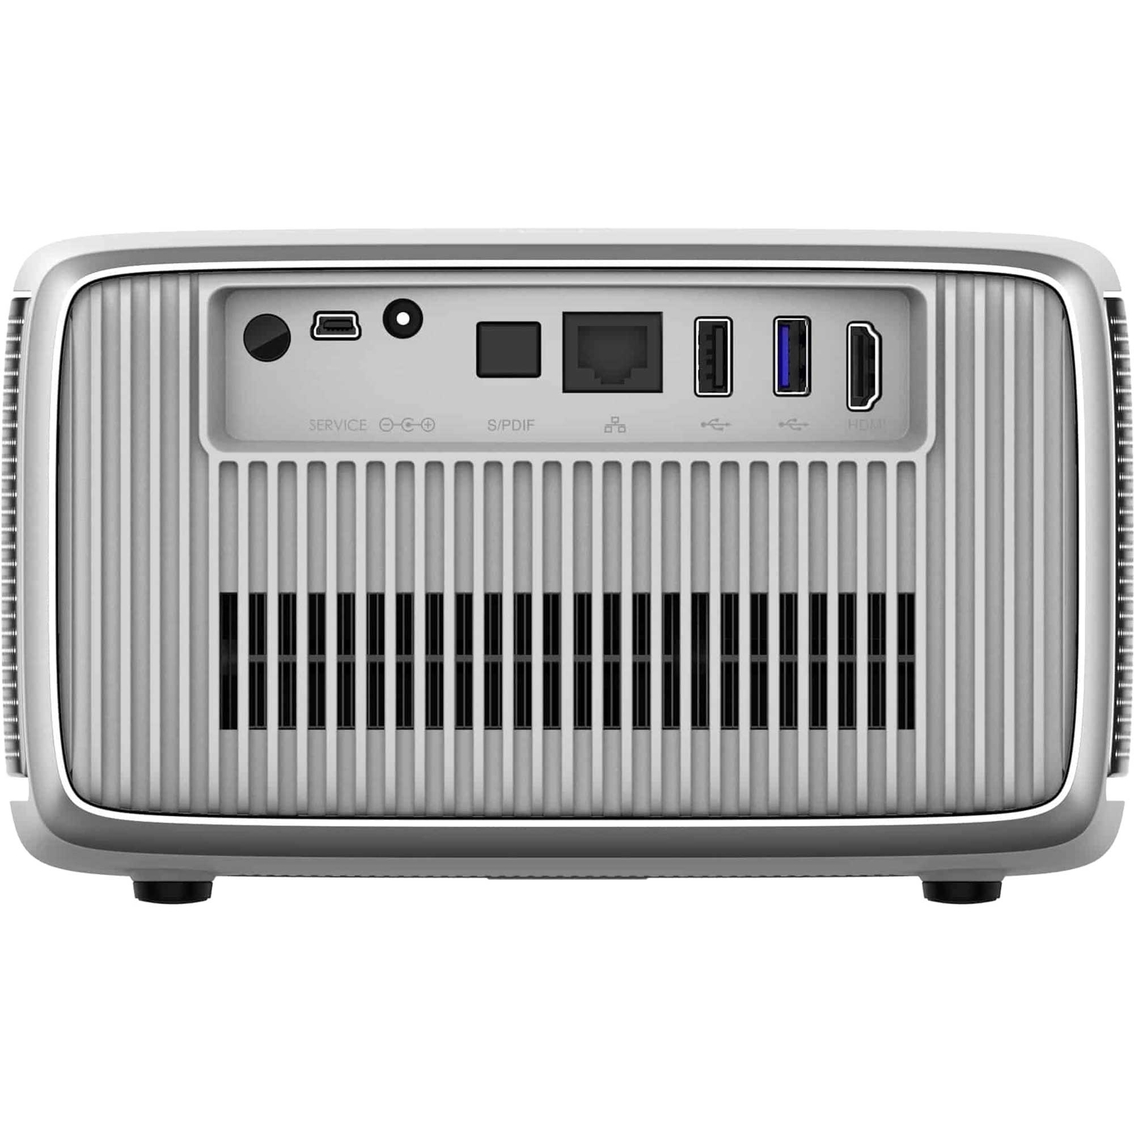 Philips Screeneo S4 Home Projector - Image 8 of 8